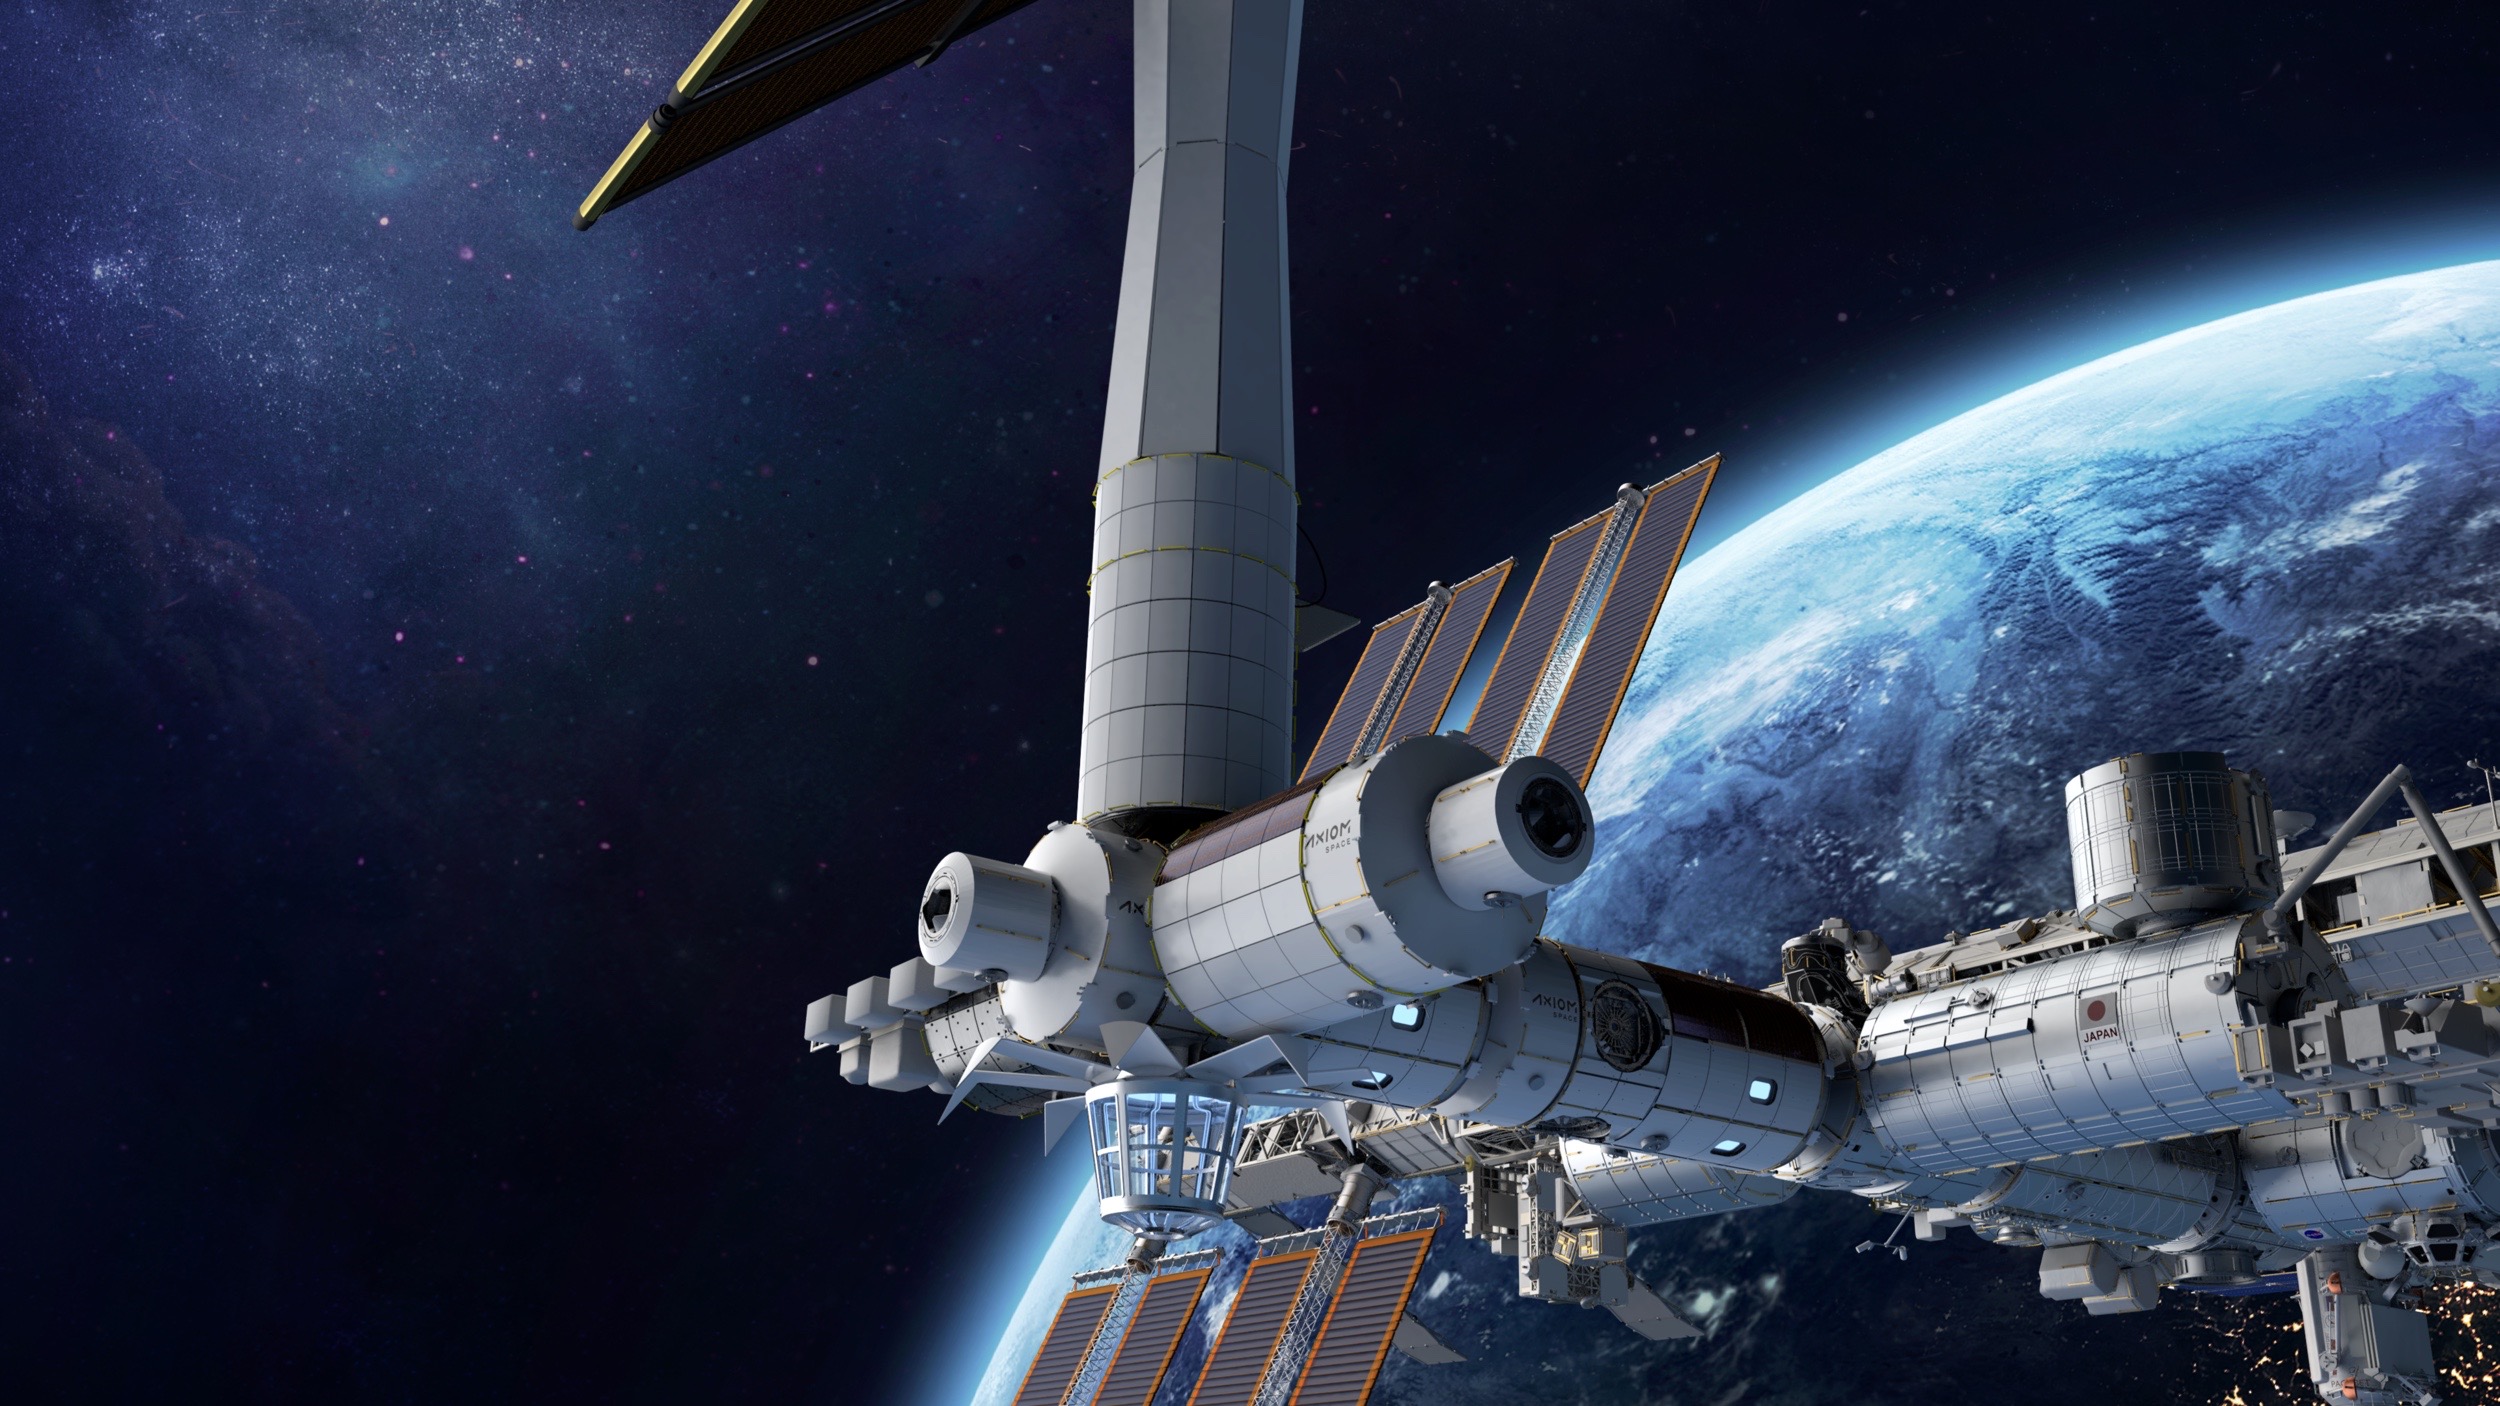 Artist's illustration of the space station that Houston-based company Axiom Space plans to build in Earth orbit.